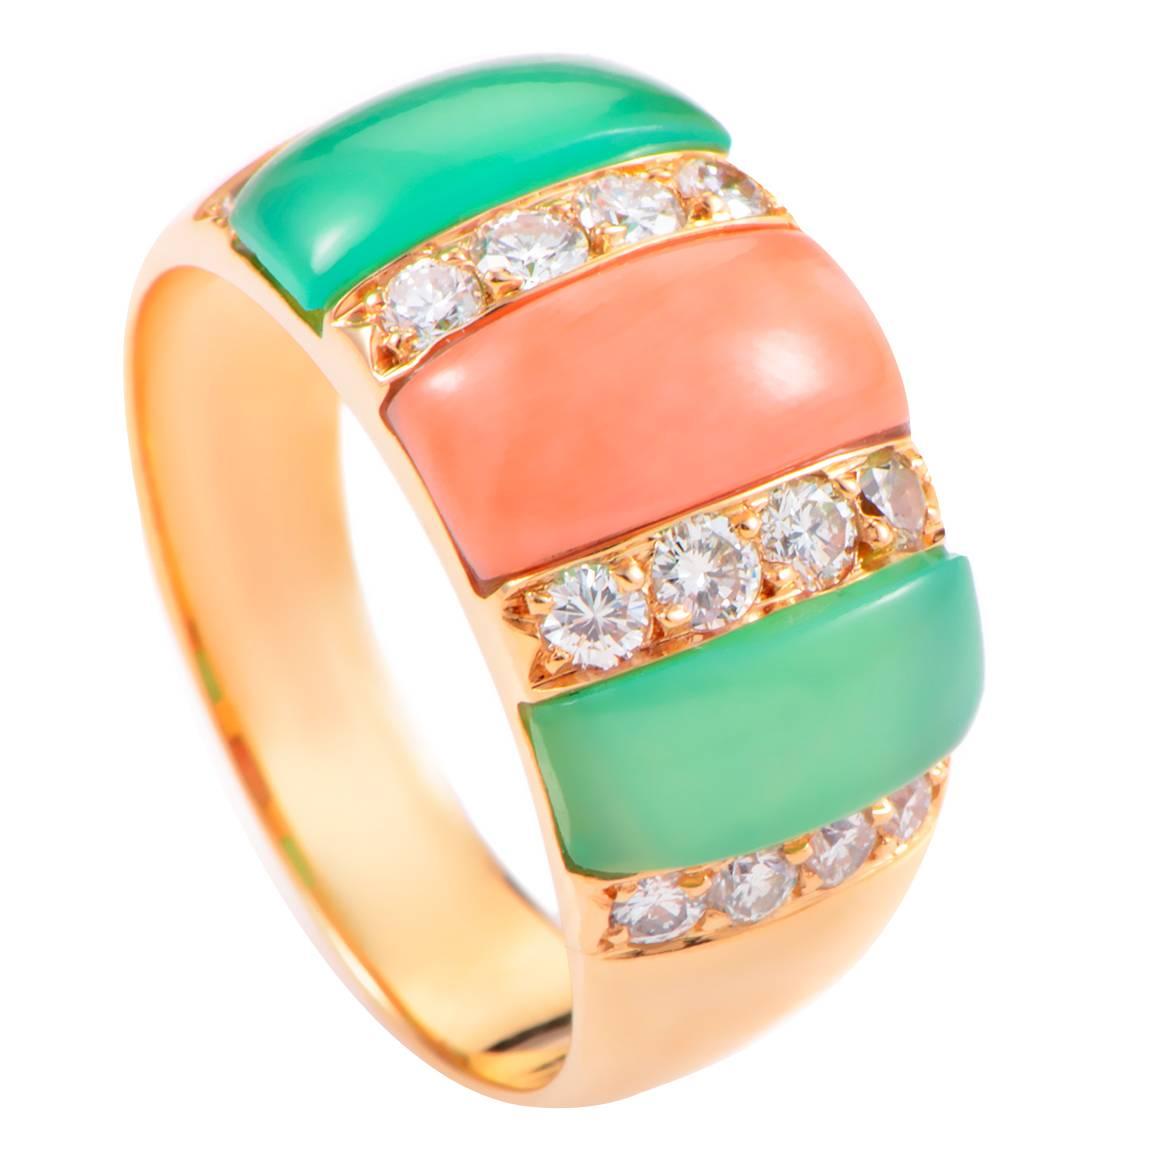 Van Cleef & Arpels Diamond Coral and Chrysoprase Gold Ring